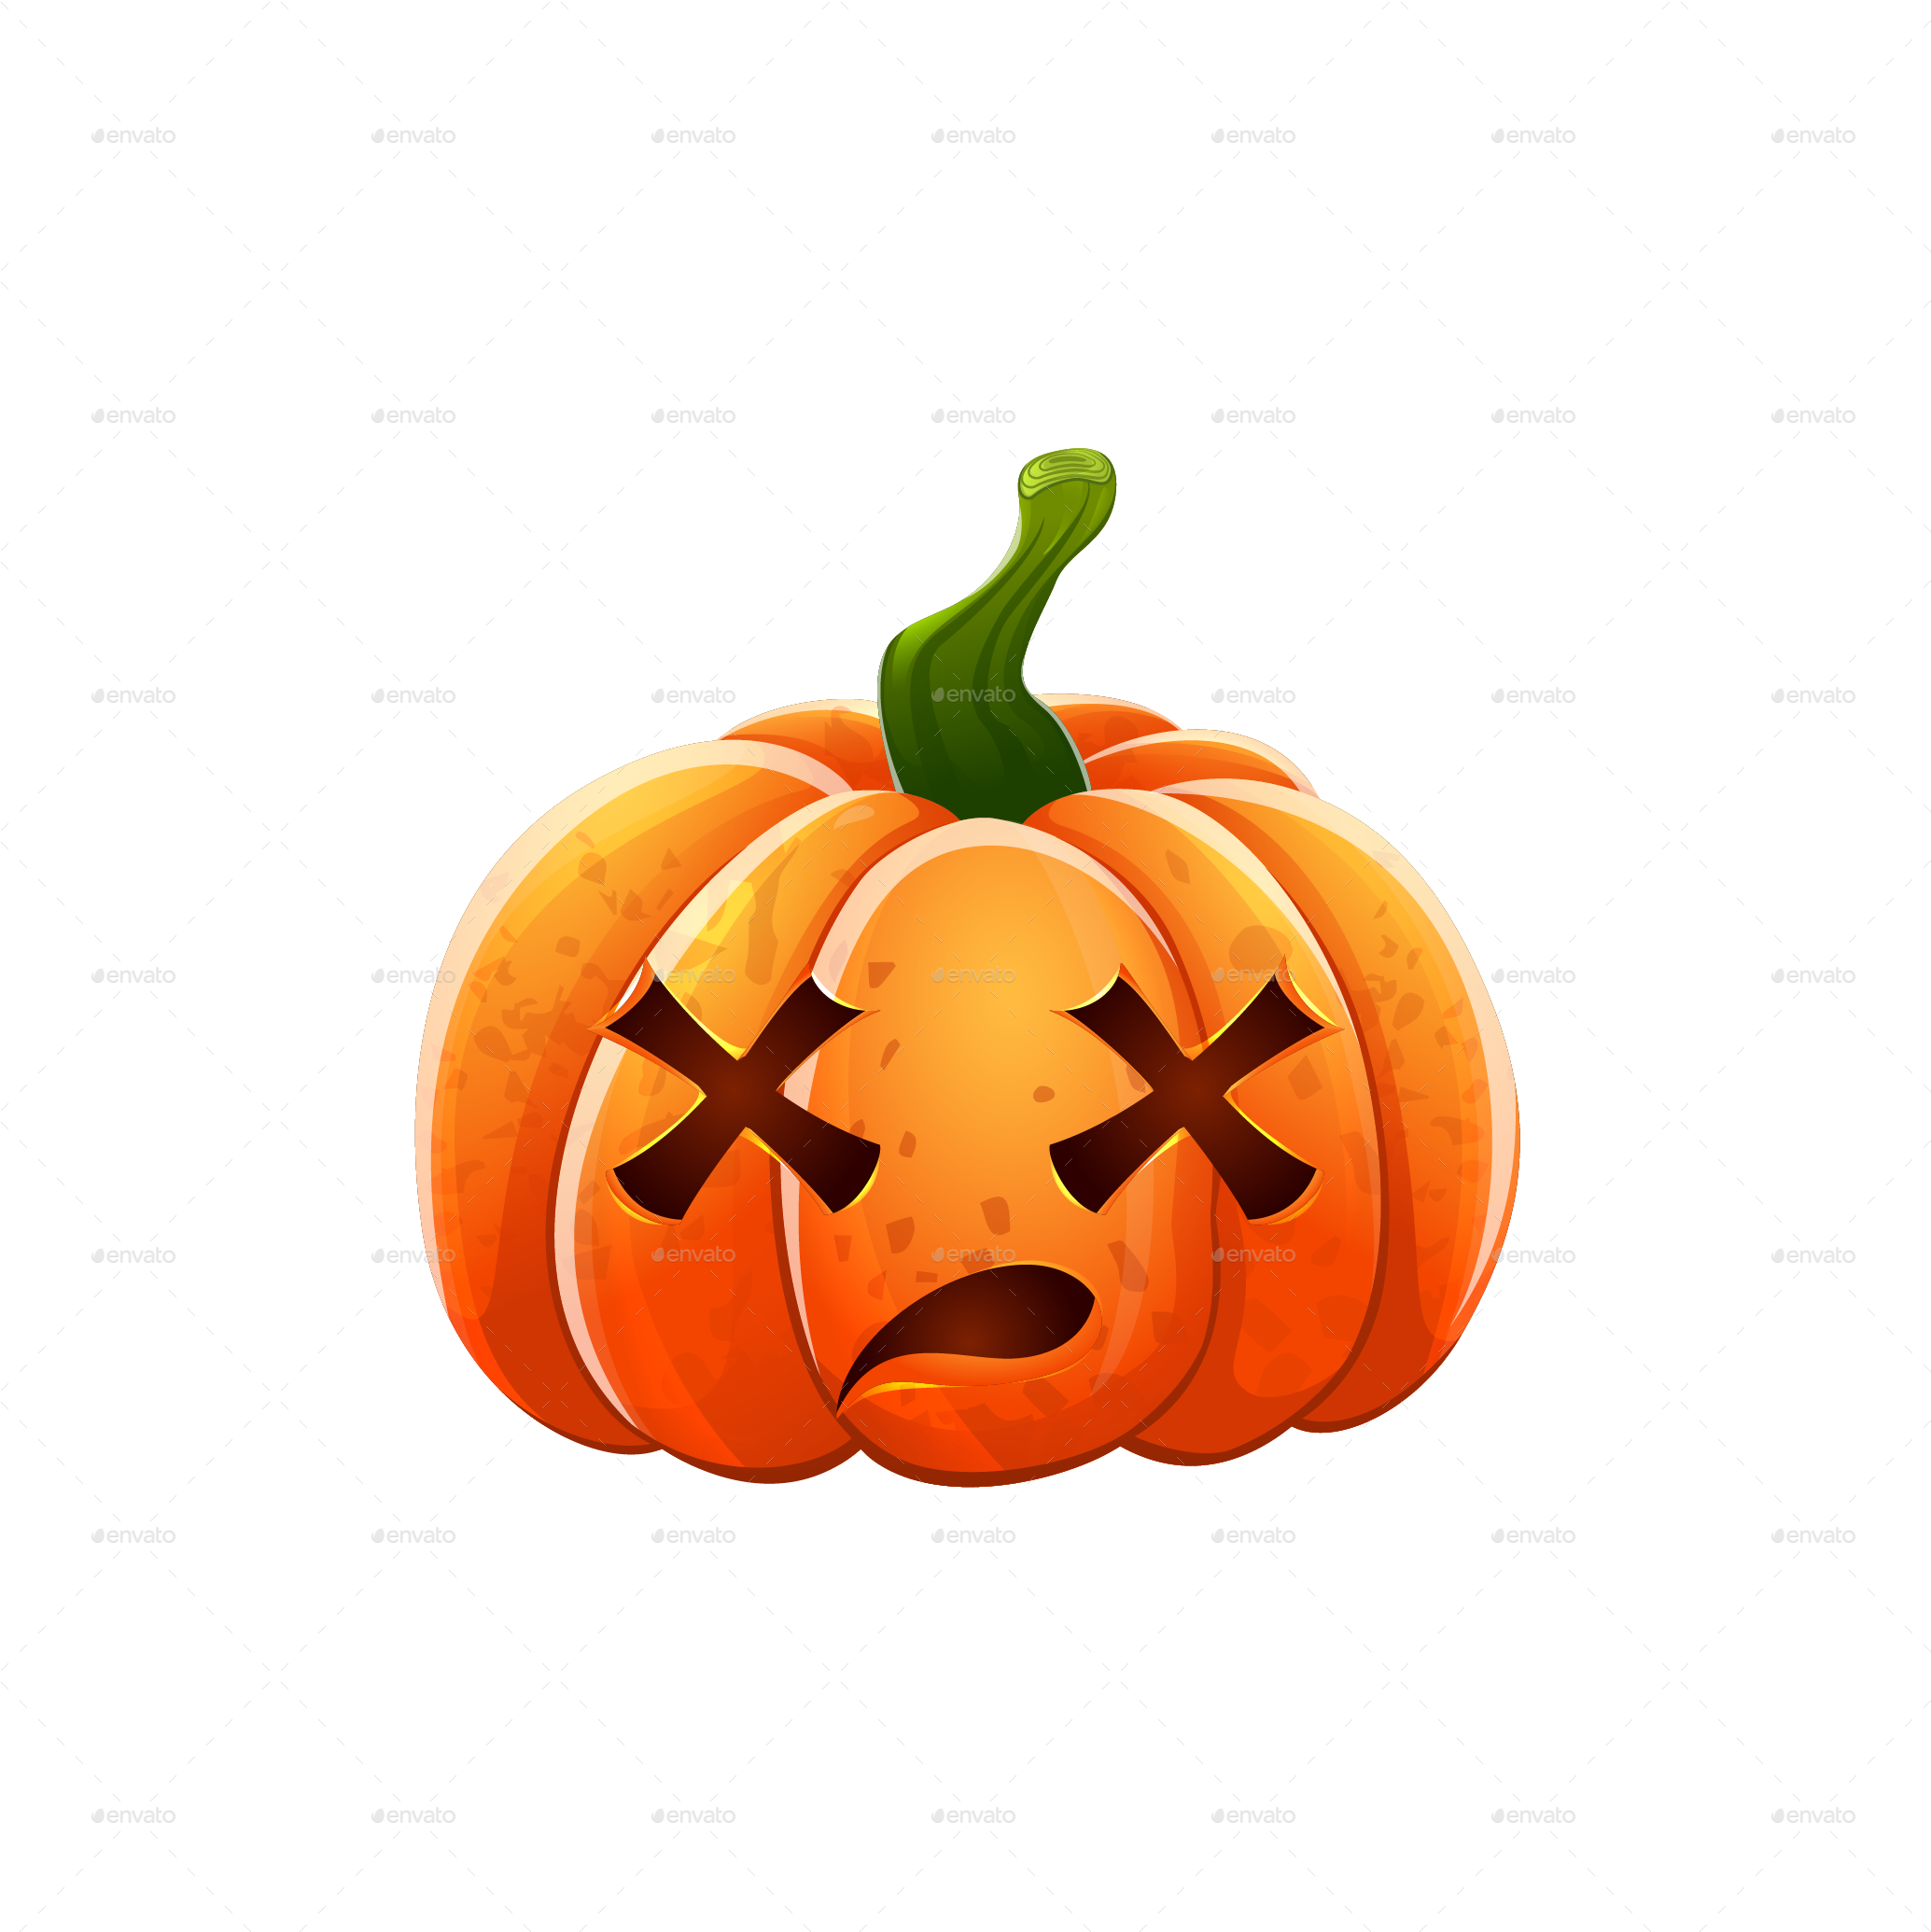 Fainted Pumpkin Halloween Graphic PNG image